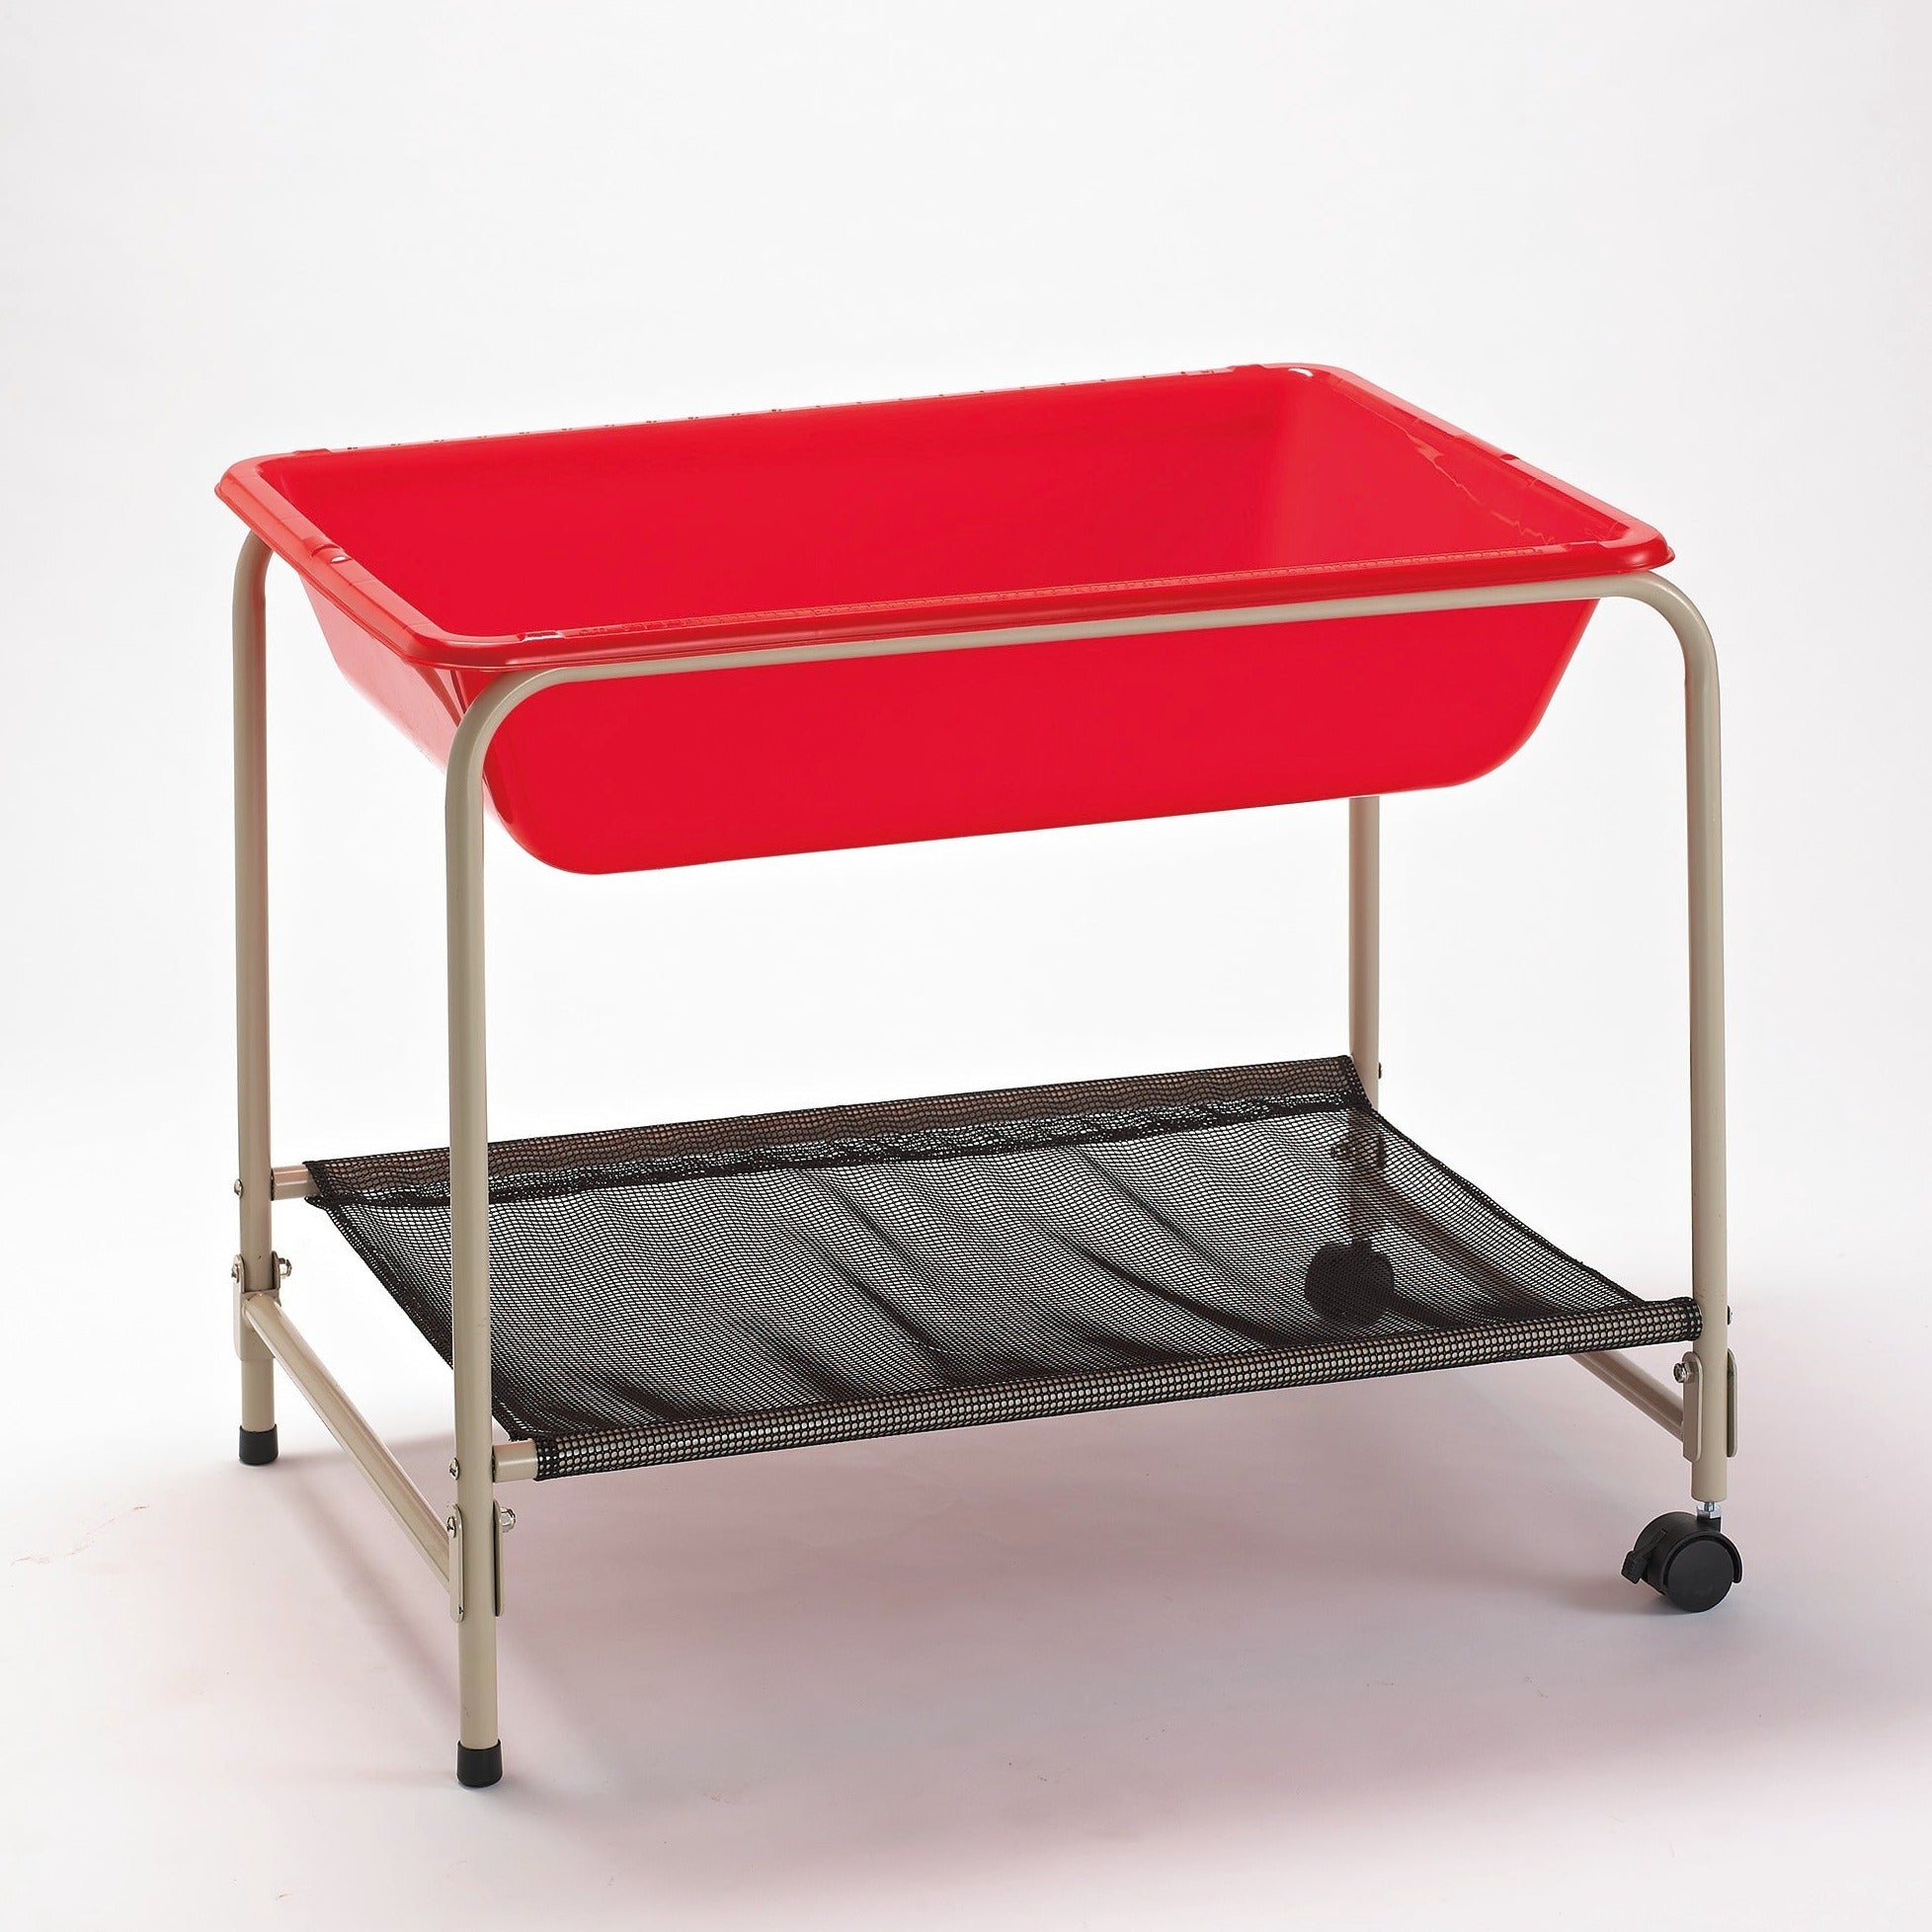 Coloured Desktop Sand and Water Tray with Stand, Introducing the Coloured Desktop Sand and Water Tray with Stand, the perfect addition to any classroom or play area. This versatile tray is designed for endless hours of sensory play and exploration.Crafted from sturdy plastic material, the coloured tray adds a vibrant touch to the learning environment while ensuring durability and resistance to wear and tear. The steel stand with powder-coated frames adds a touch of robustness to the table, ensuring it withs